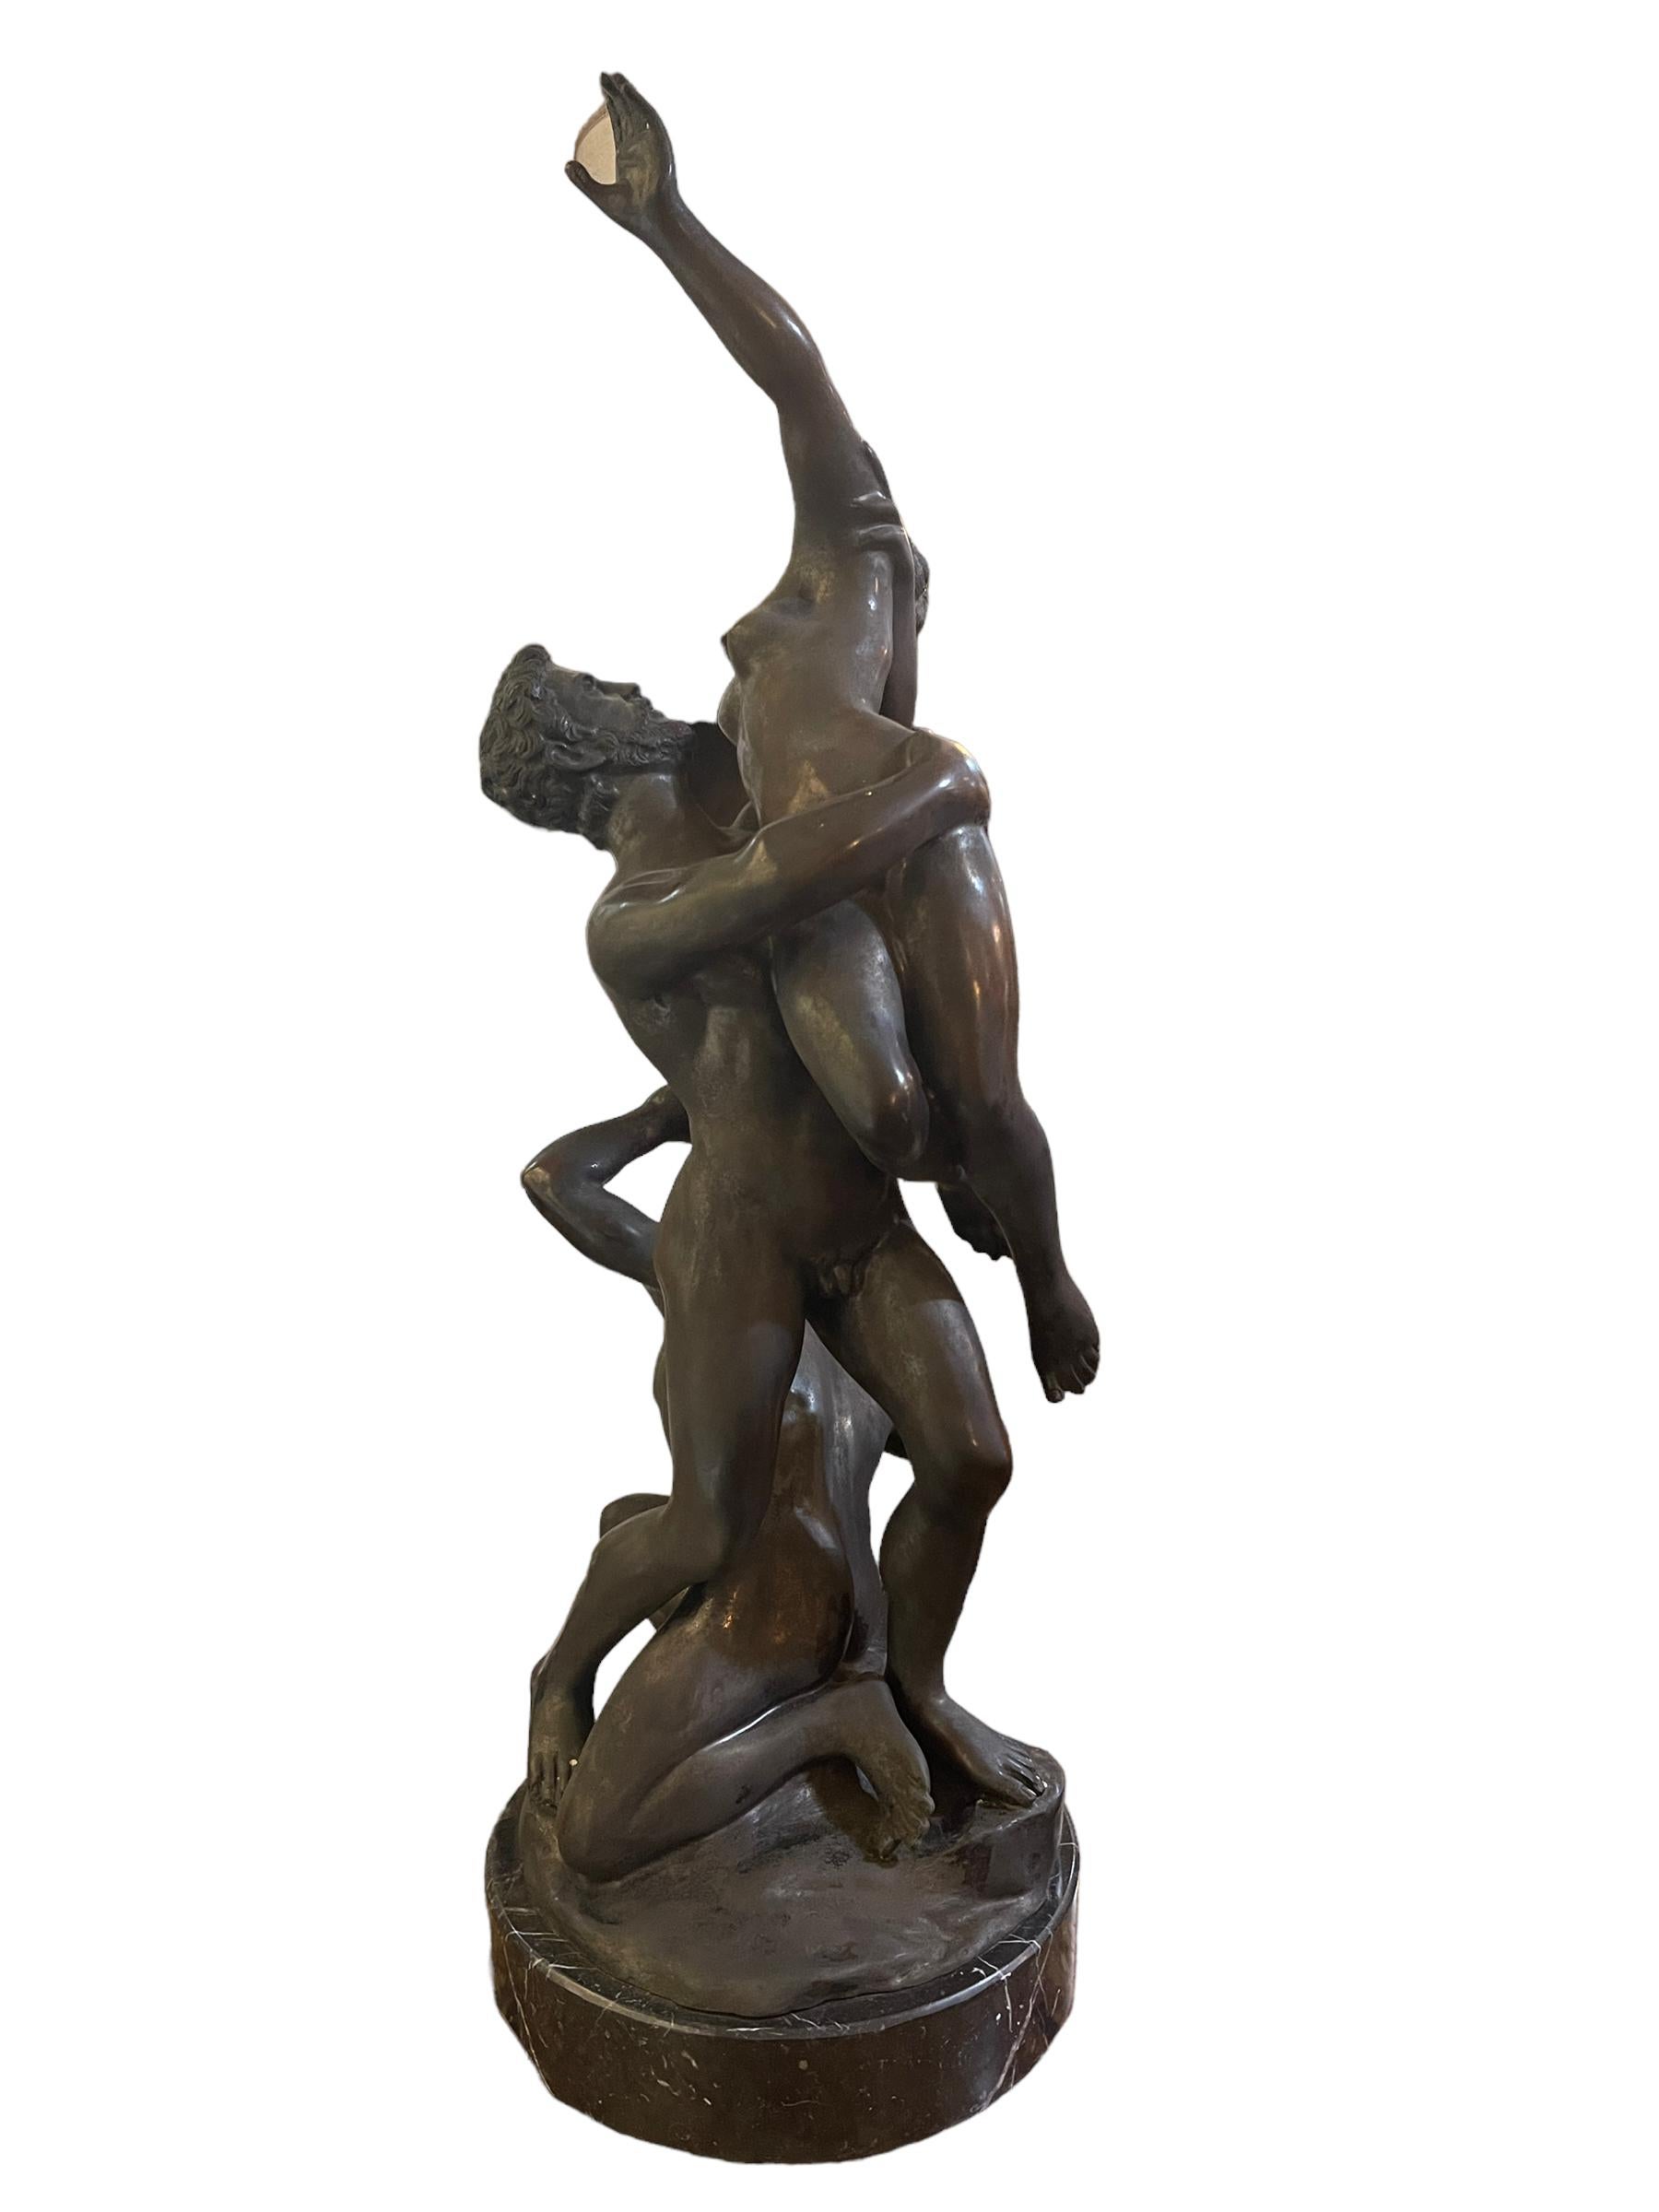 Bronze sculpture, 20th century, rape of the Sabine women
Bronze sculpture on a marble base, it reproduces the Rape of the Sabine Women by Giambologna.
Dimensions excluding base: diameter 25 cm, height 77 cm
Good condition as from picture